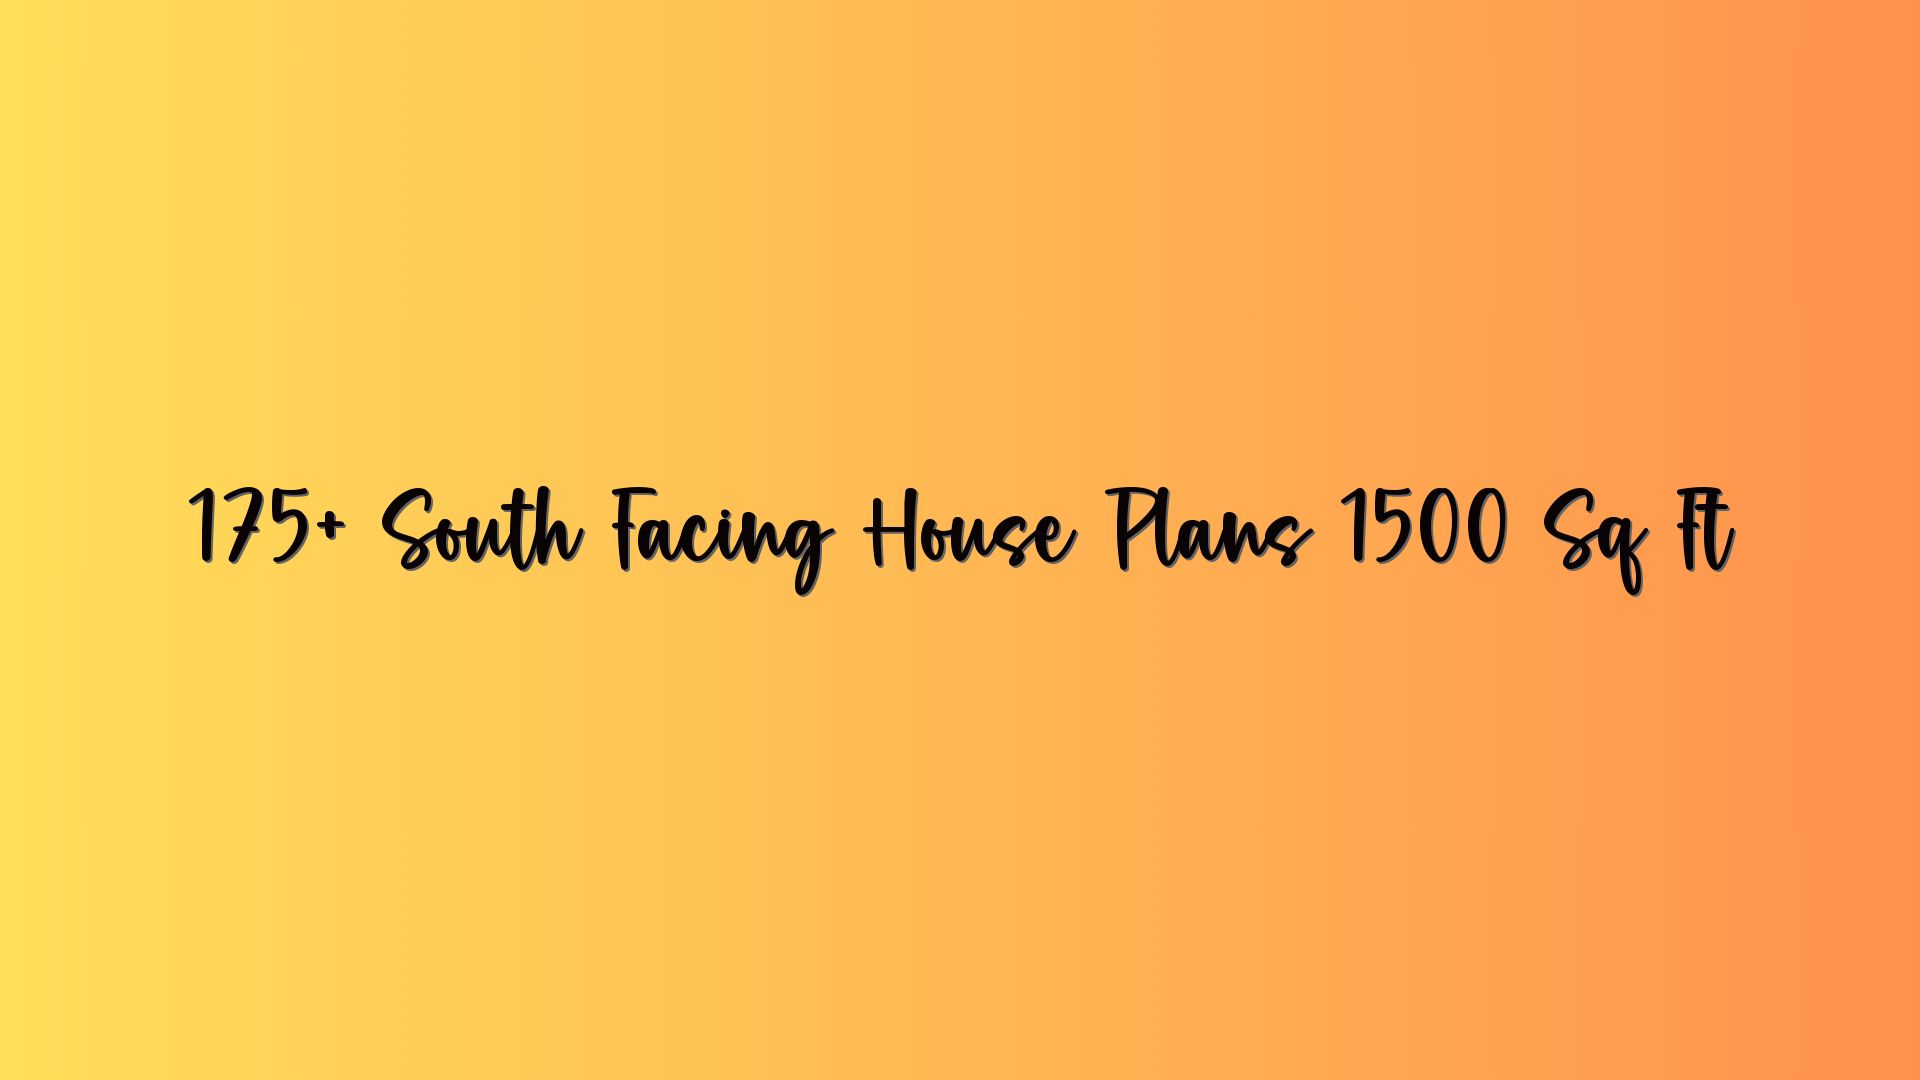 175+ South Facing House Plans 1500 Sq Ft